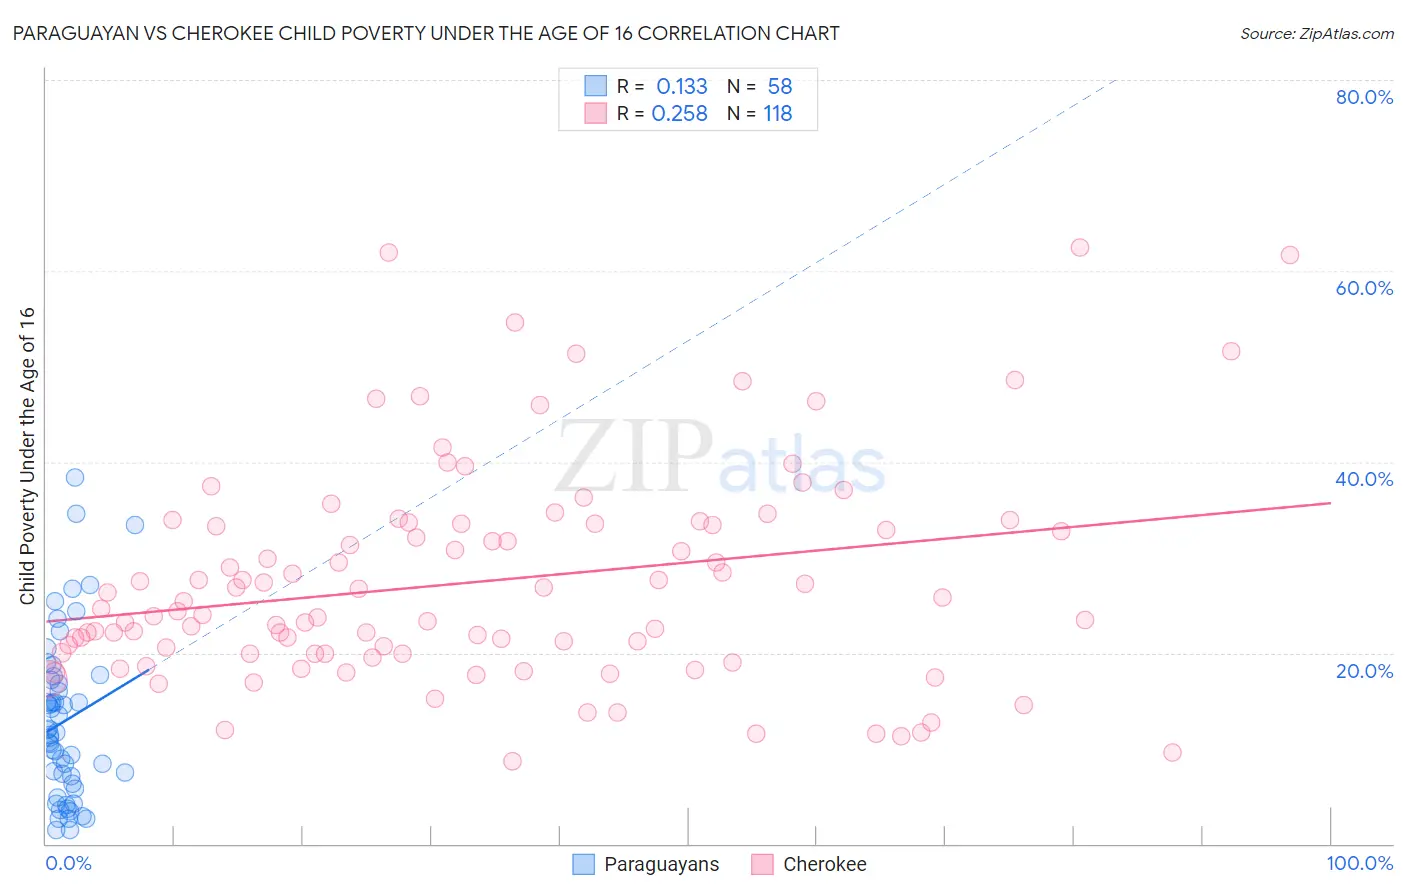 Paraguayan vs Cherokee Child Poverty Under the Age of 16